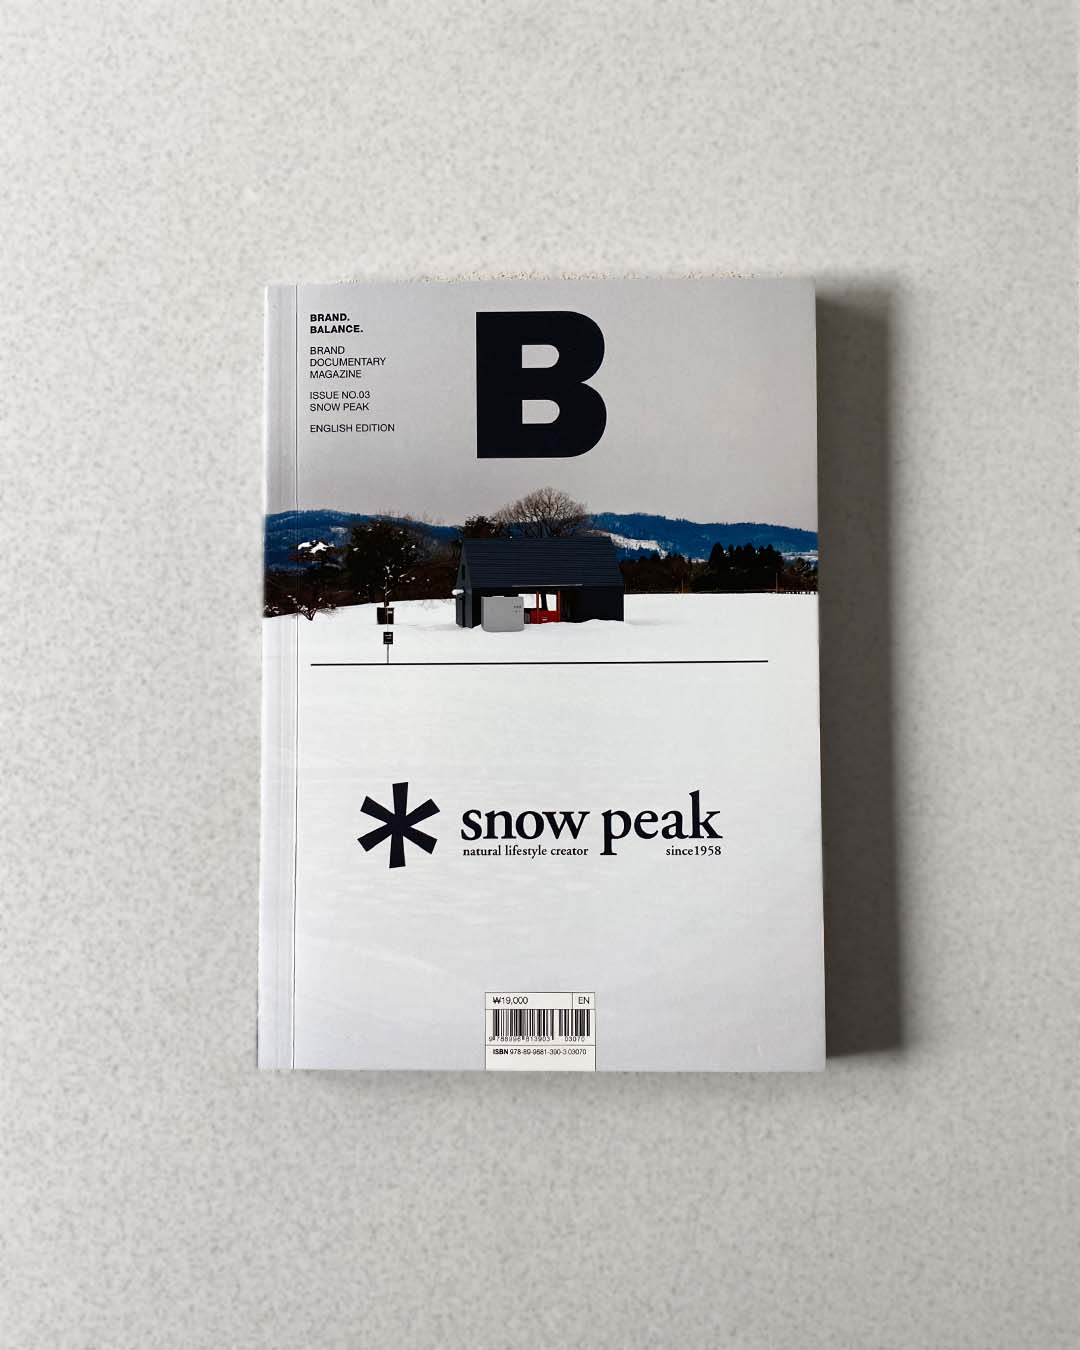 Front Cover of Magazine B - Issue No.3: Snow Peak